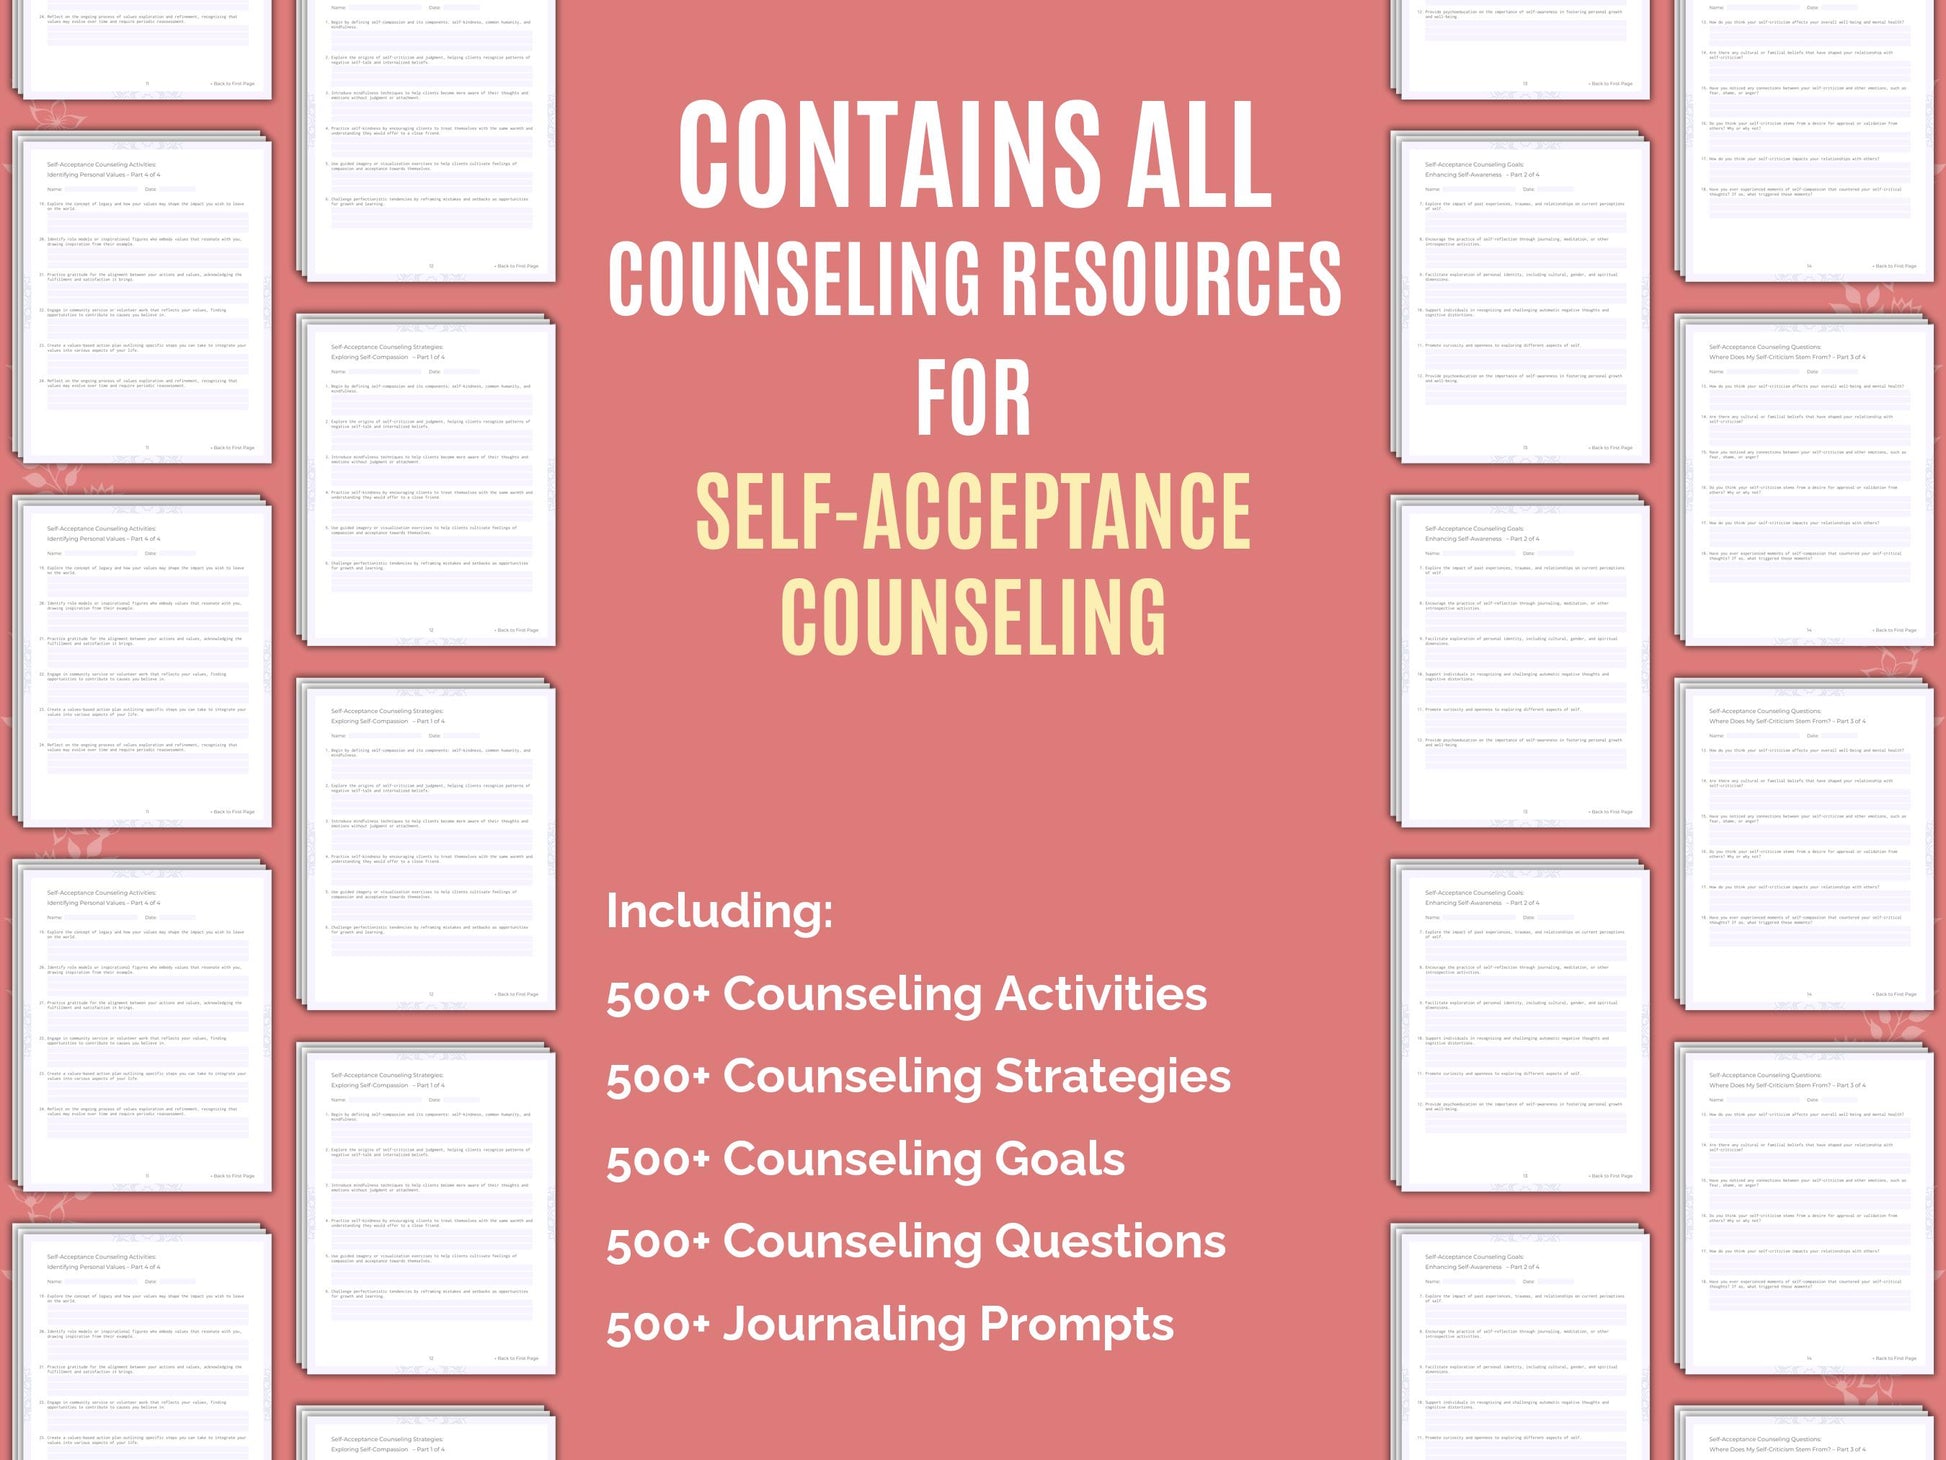 Resource, Template, Worksheet, Self-Acceptance Tool, Self-Acceptance Idea, Counseling, Mental Health, Therapist, Self-Acceptance, Therapy, Workbook, Counselor, Content